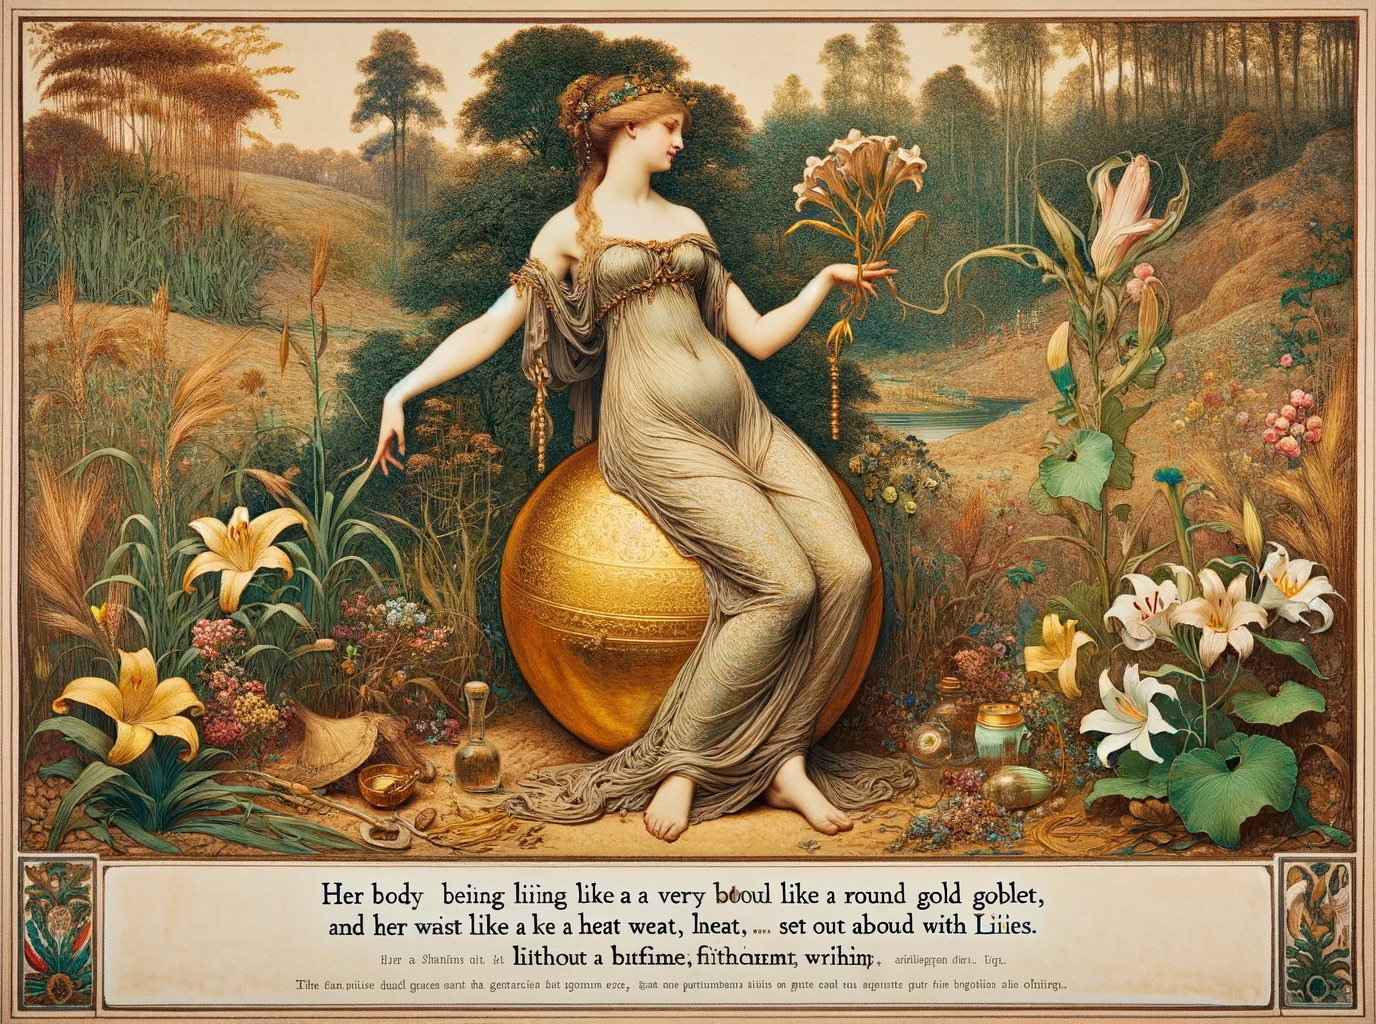 Ark.au Illustrated Bible - Song of Solomon 7:2 - Your body is like a round goblet, No mixed wine is wanting. Your waist is like a heap of wheat, Set about with lilies.